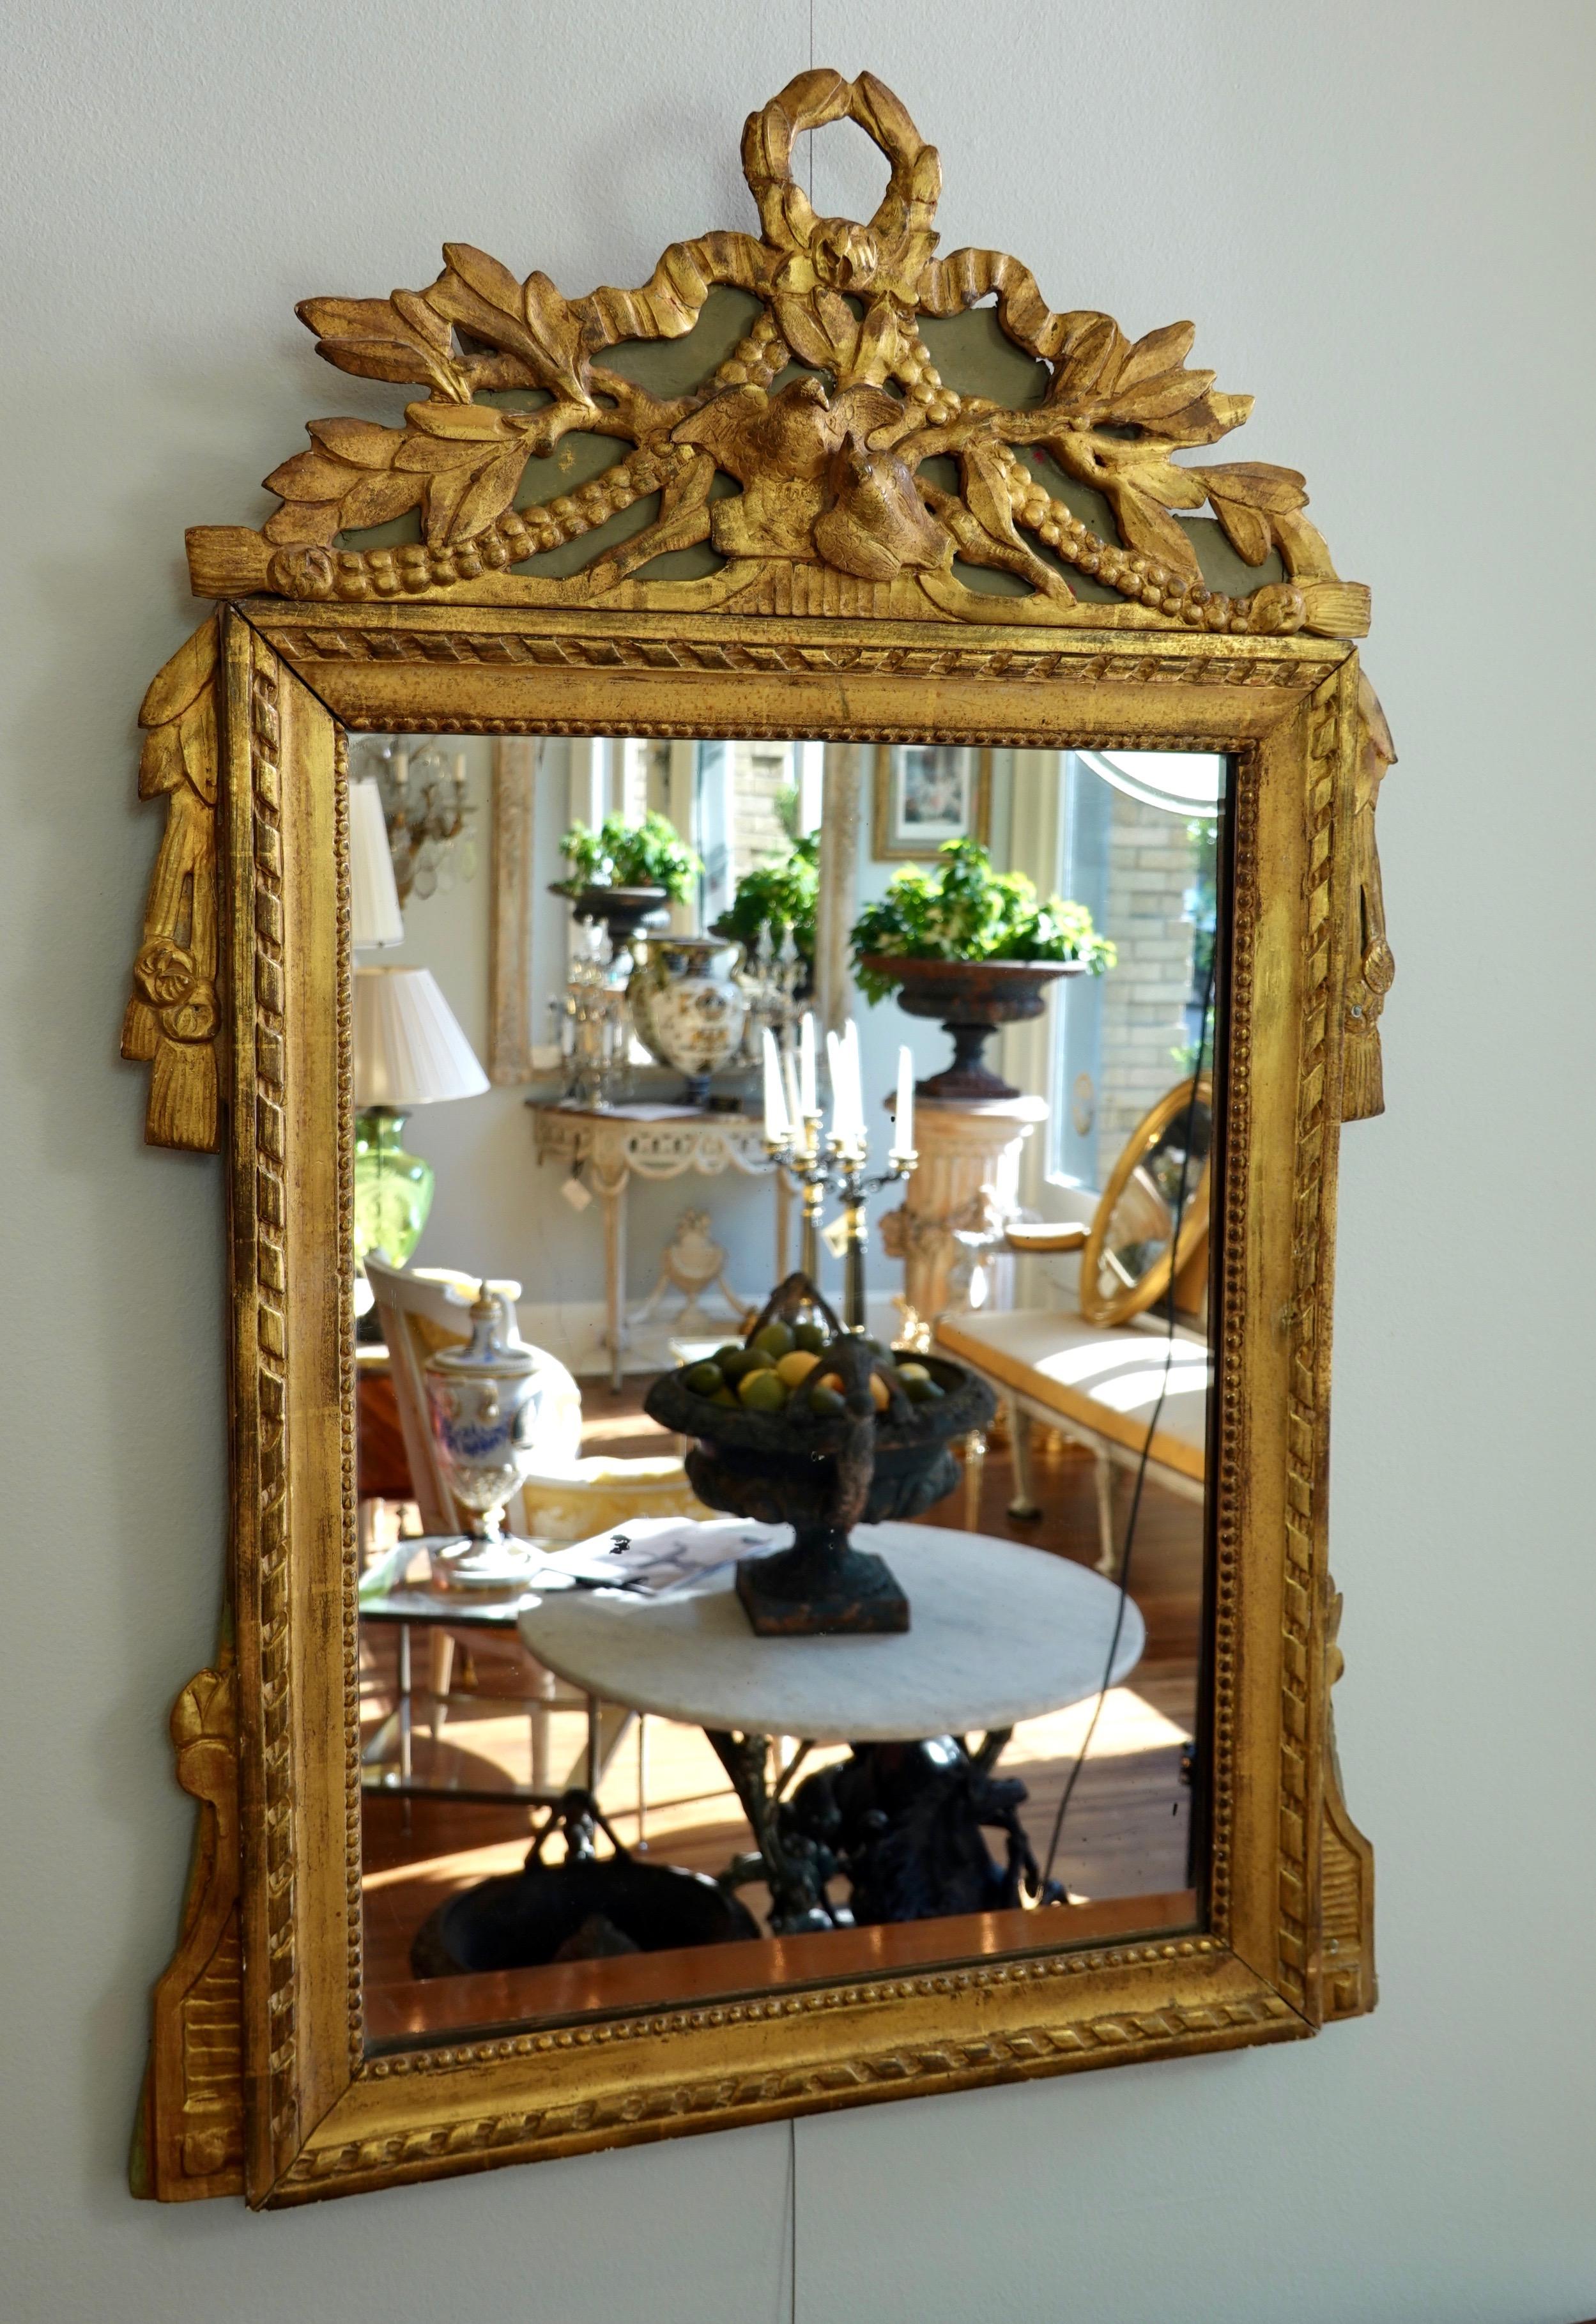 Louis XVI Period Marriage Trumeau Mirror with Birds For Sale 1